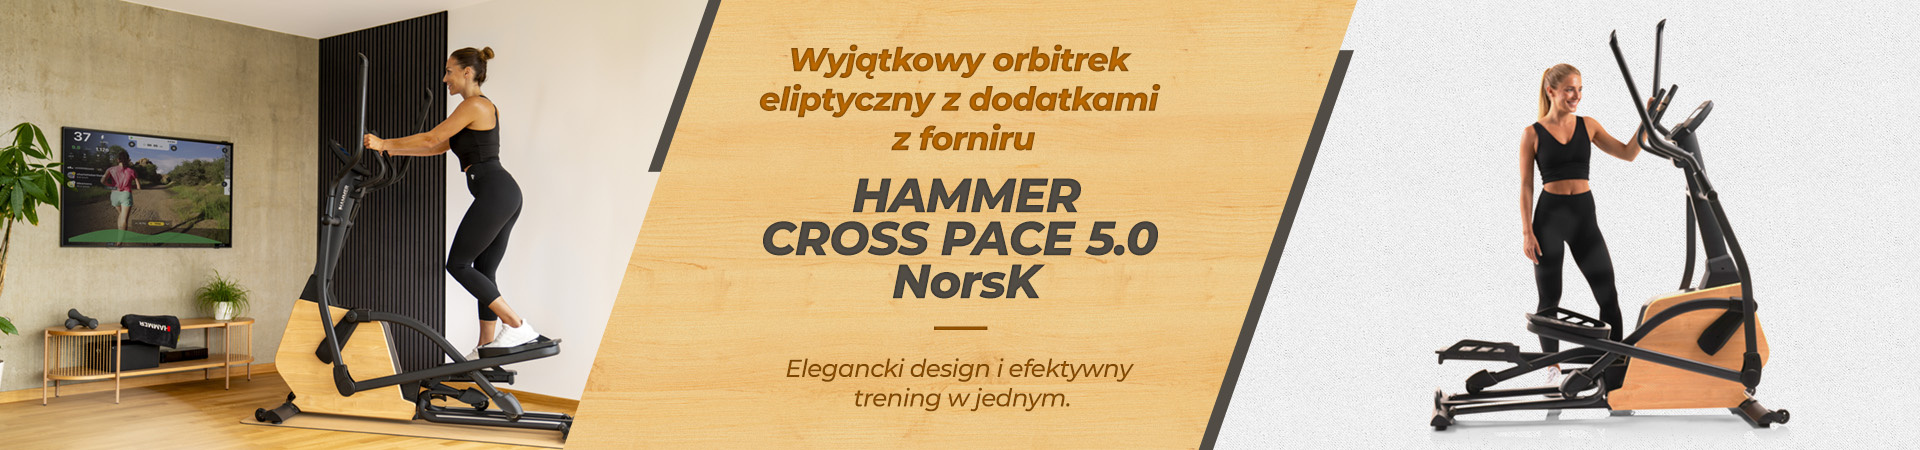 HAMMER Cross Pace 5.0 NorsK